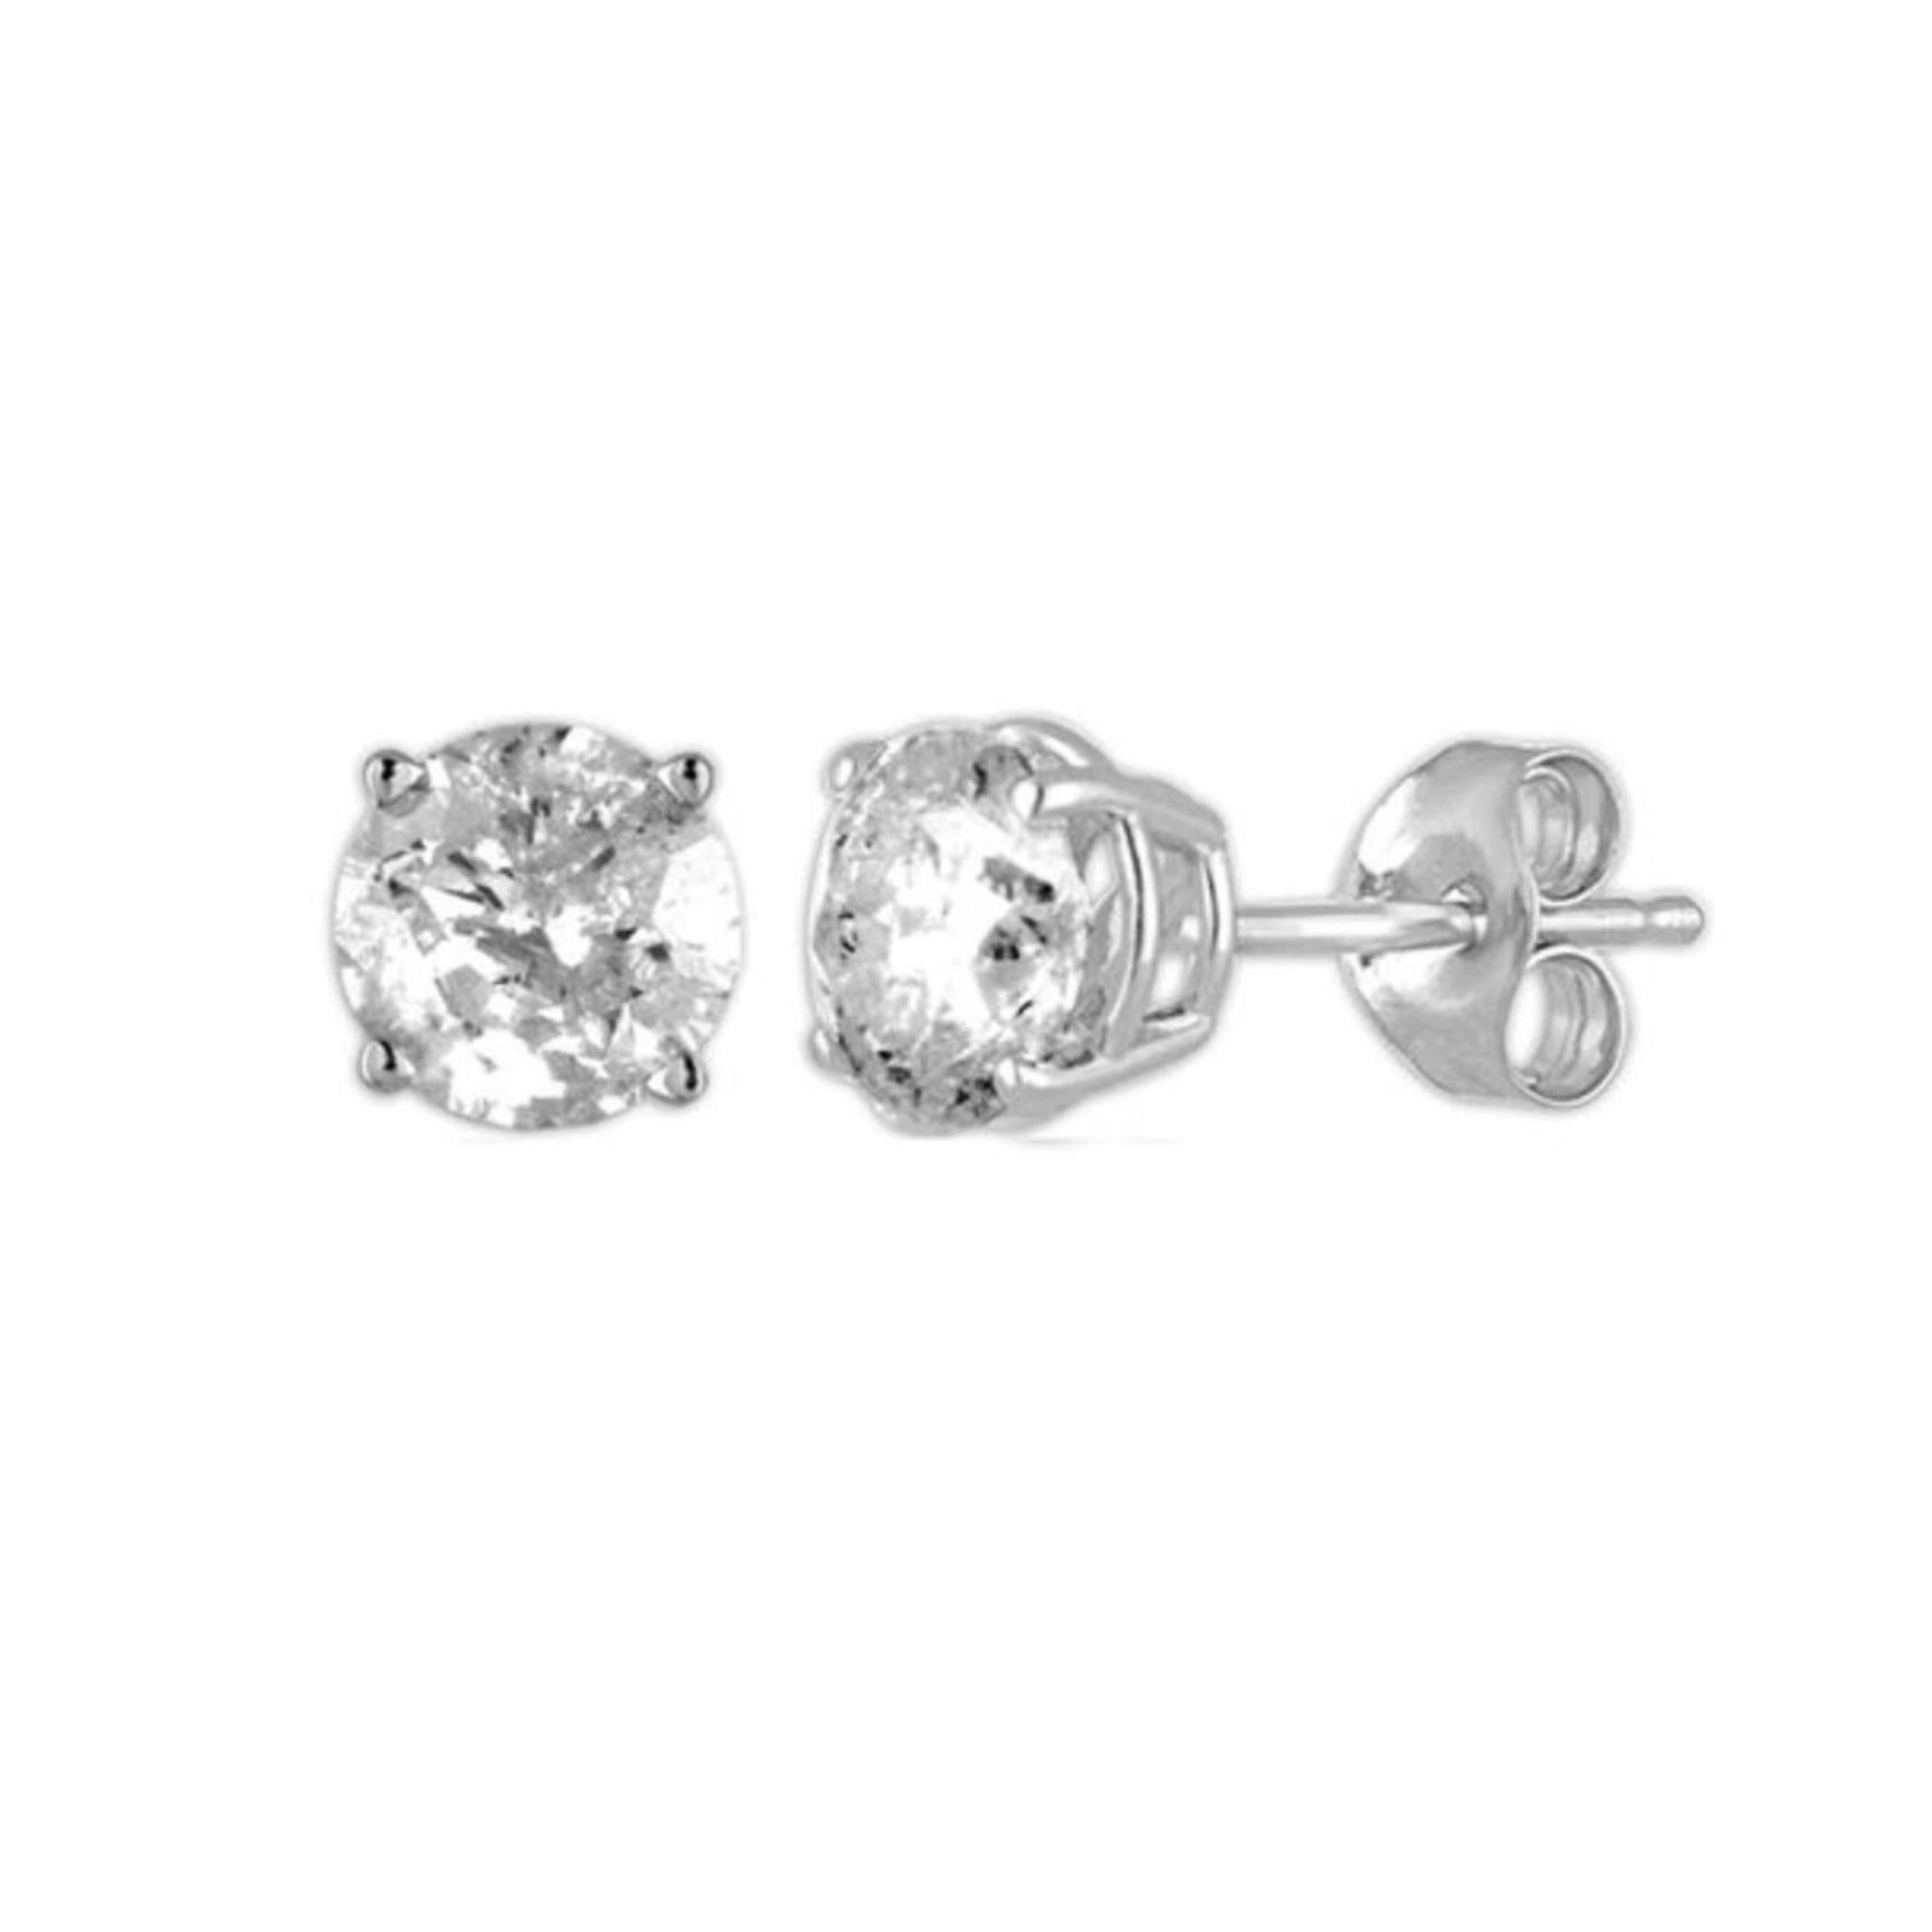 14Kt White Gold 1/3 Ct Genuine Natural Diamond Round Stud Earrings